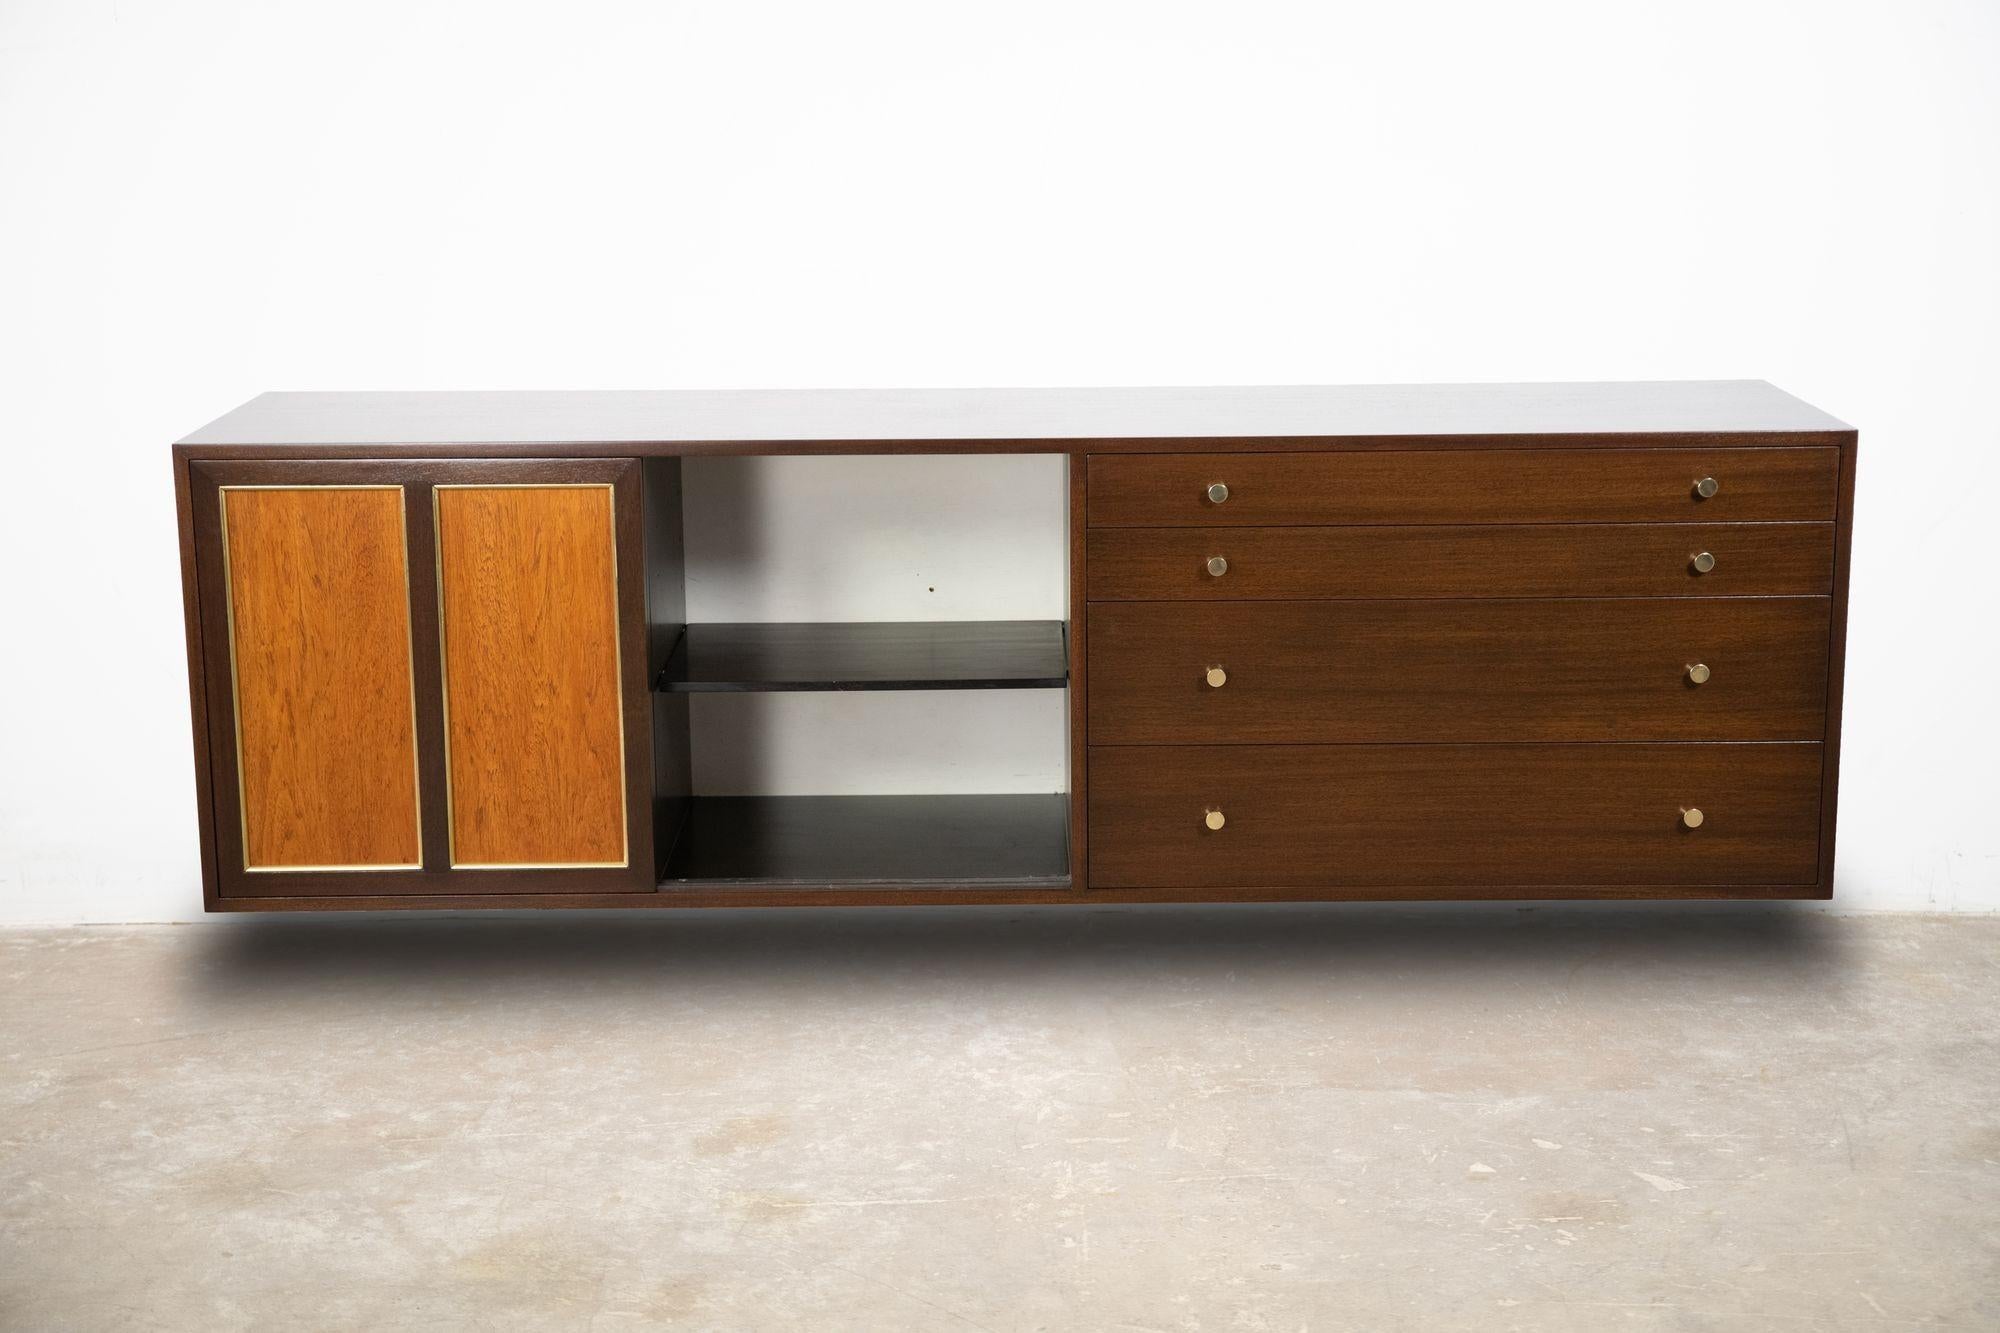 Beautiful four-drawer / sliding door wall mount credenza designed by Harvey Probber. The doors slide open to reveal an adjustable shelf and two slide-out utility drawers, the four drawers have solid brass pulls, and the top drawer for silver. The